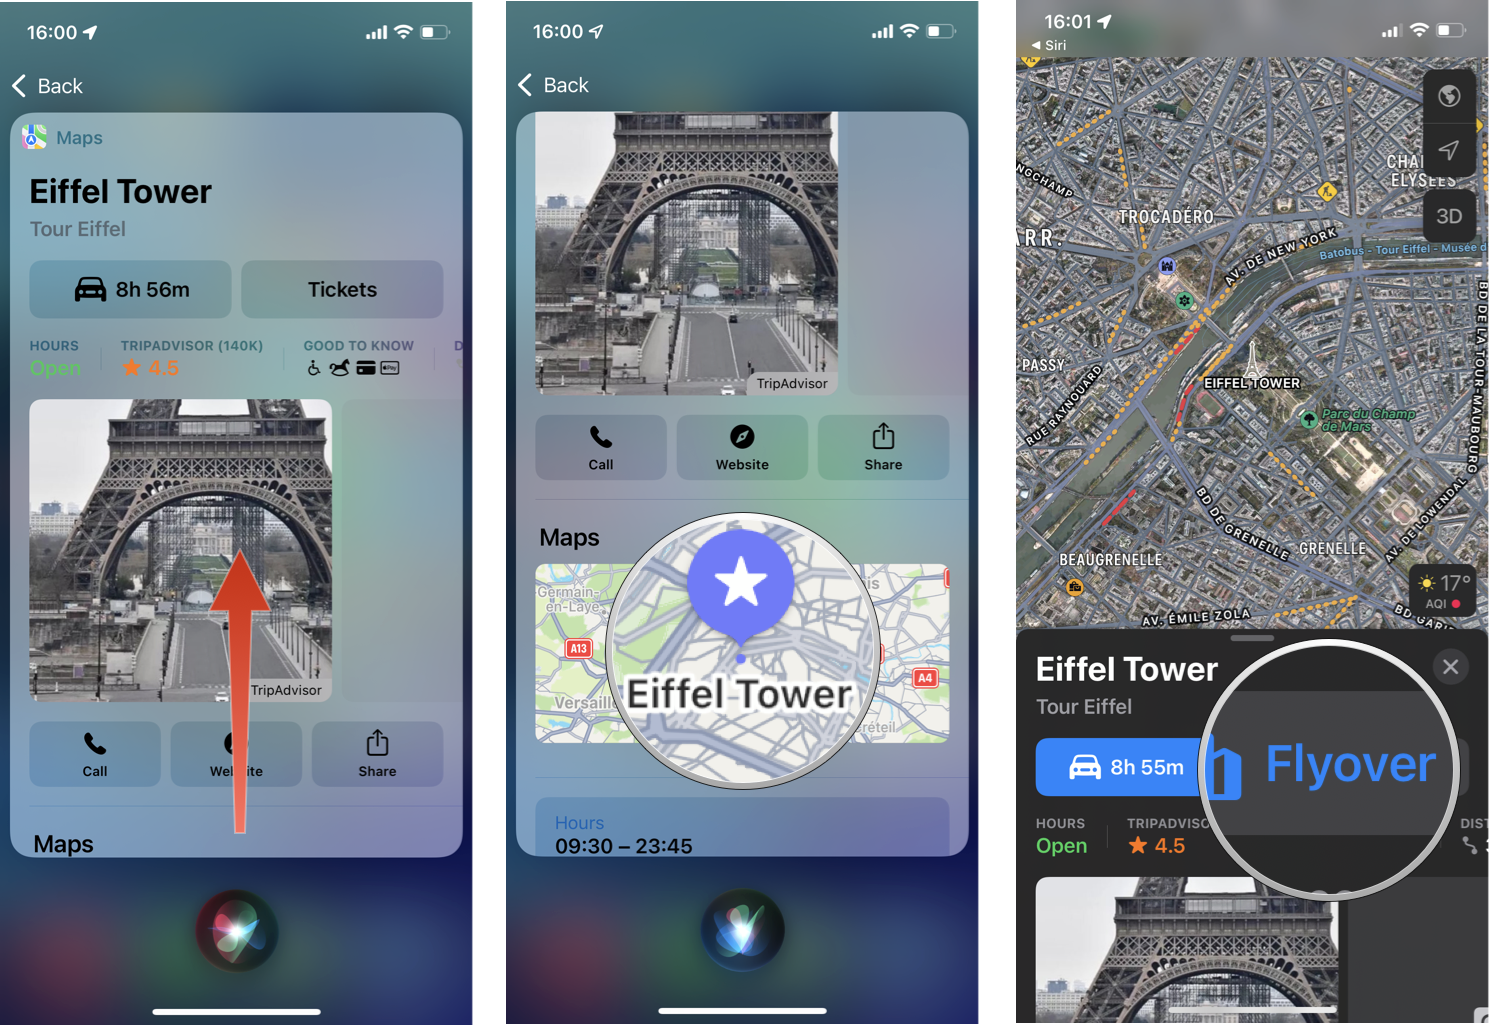 How To Use Flyover In Maps With Siri: Swipe up on the search result to reveal the map, tap the map, tap Flyover